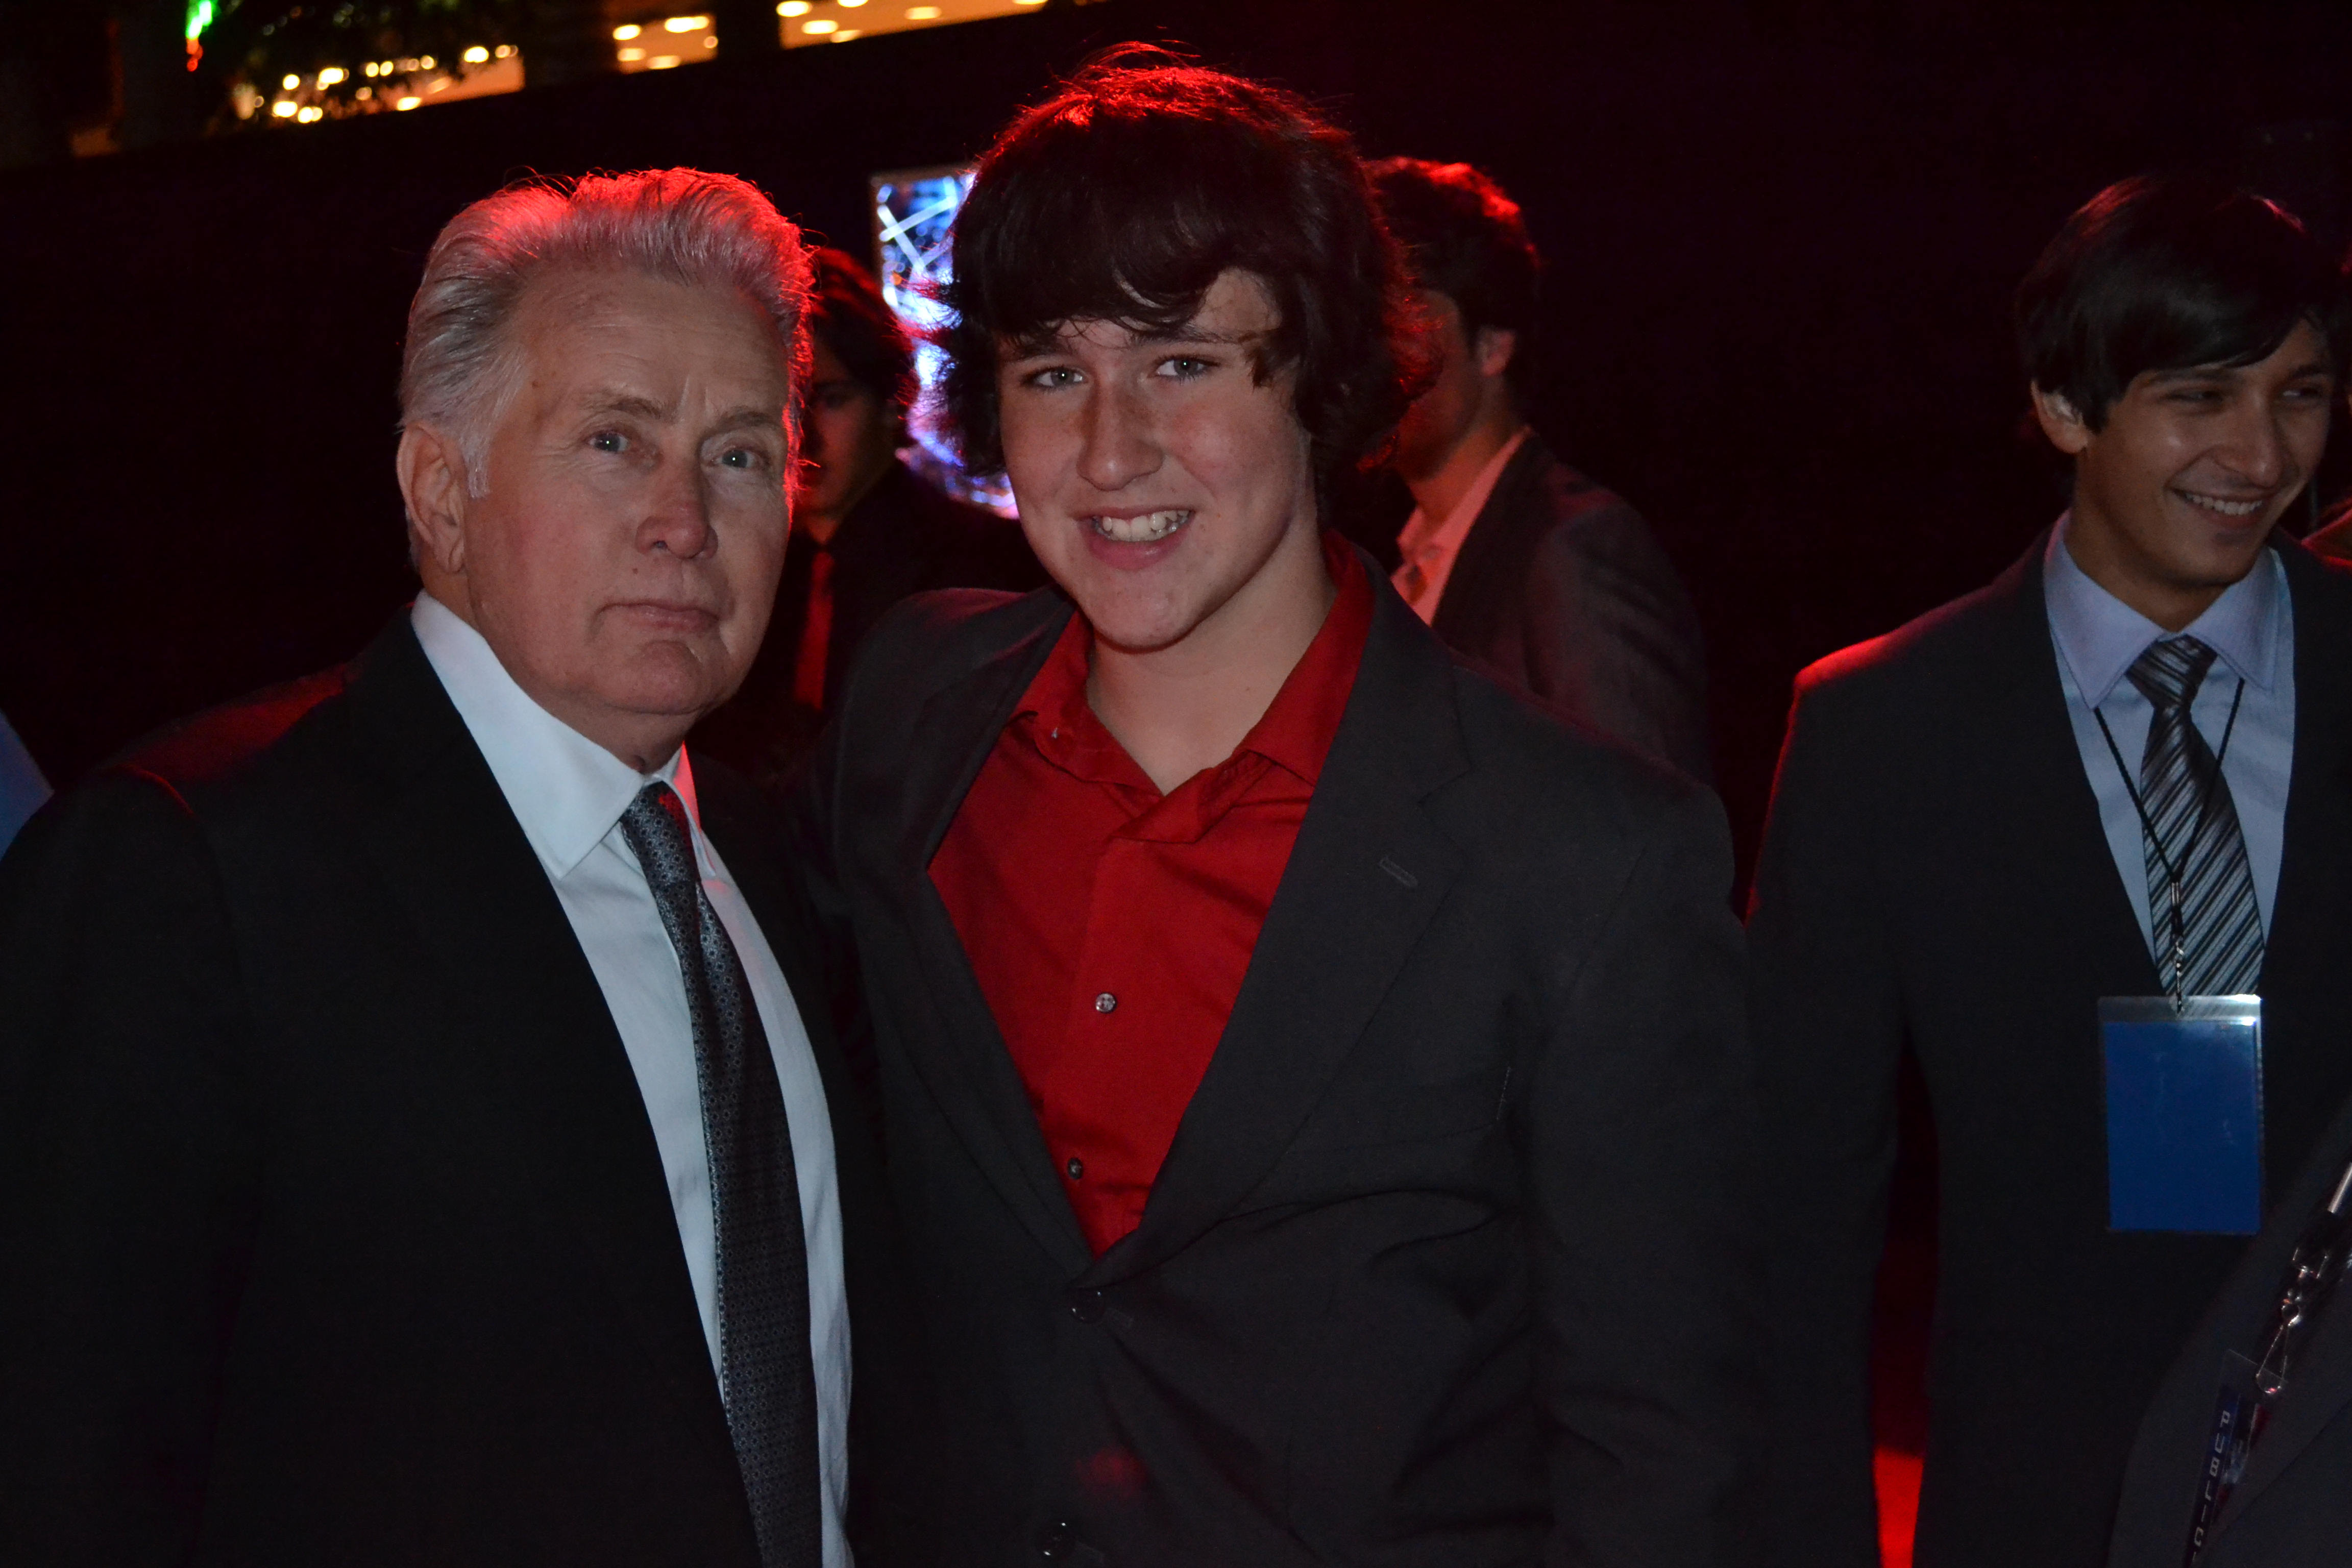 With Martin Sheen at The amazing Spiderman Premiere